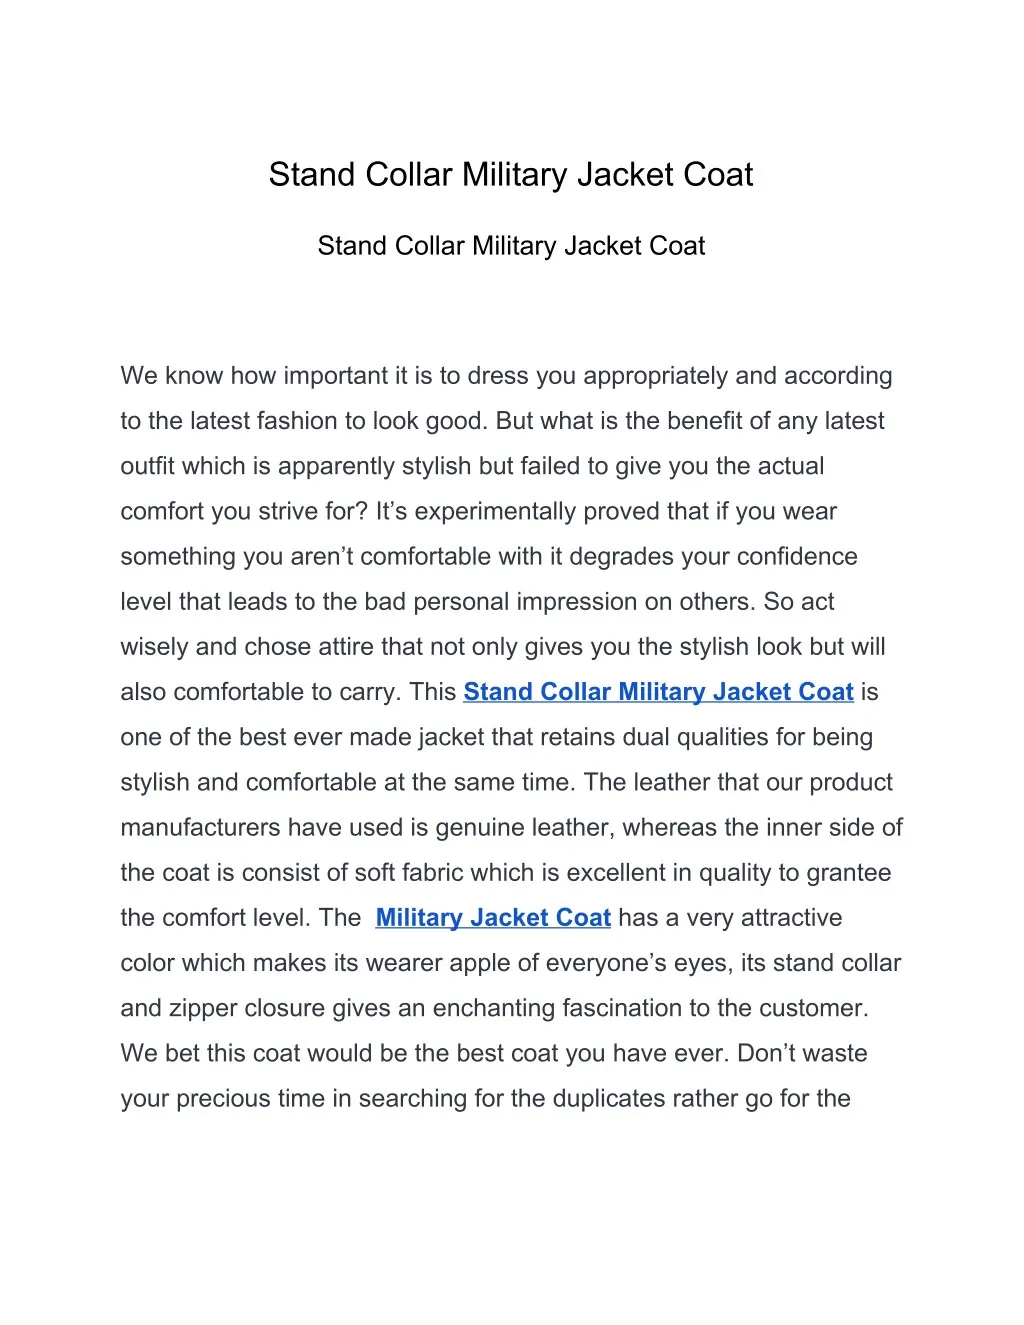 stand collar military jacket coat